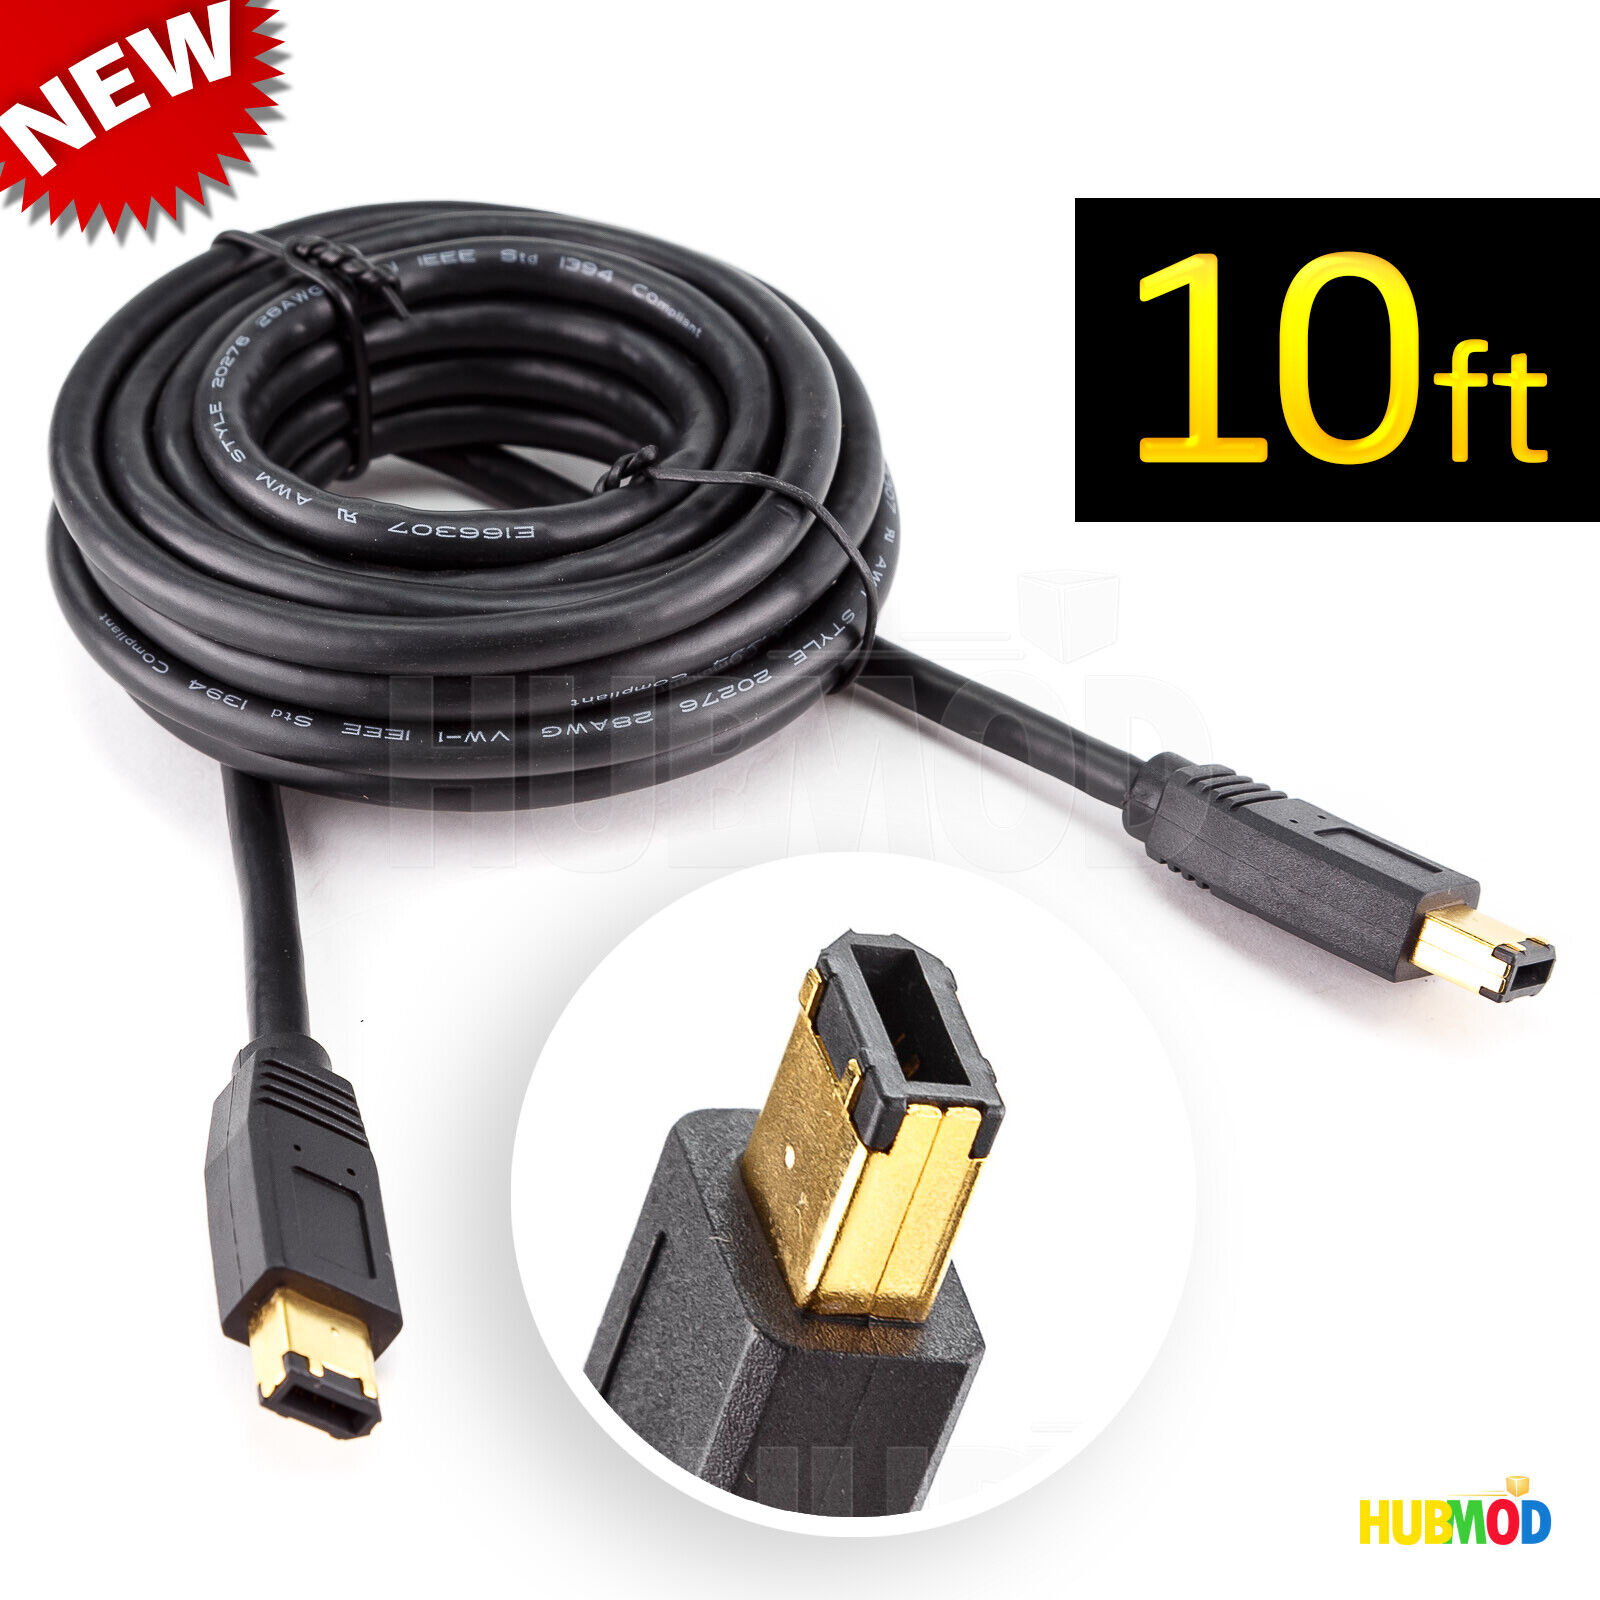 10 FT FIREWIRE CABLE CORD 6 PIN to 6 PIN IEEE1394 PC MAC DV 6P-6P 6-6 PINS BLACK